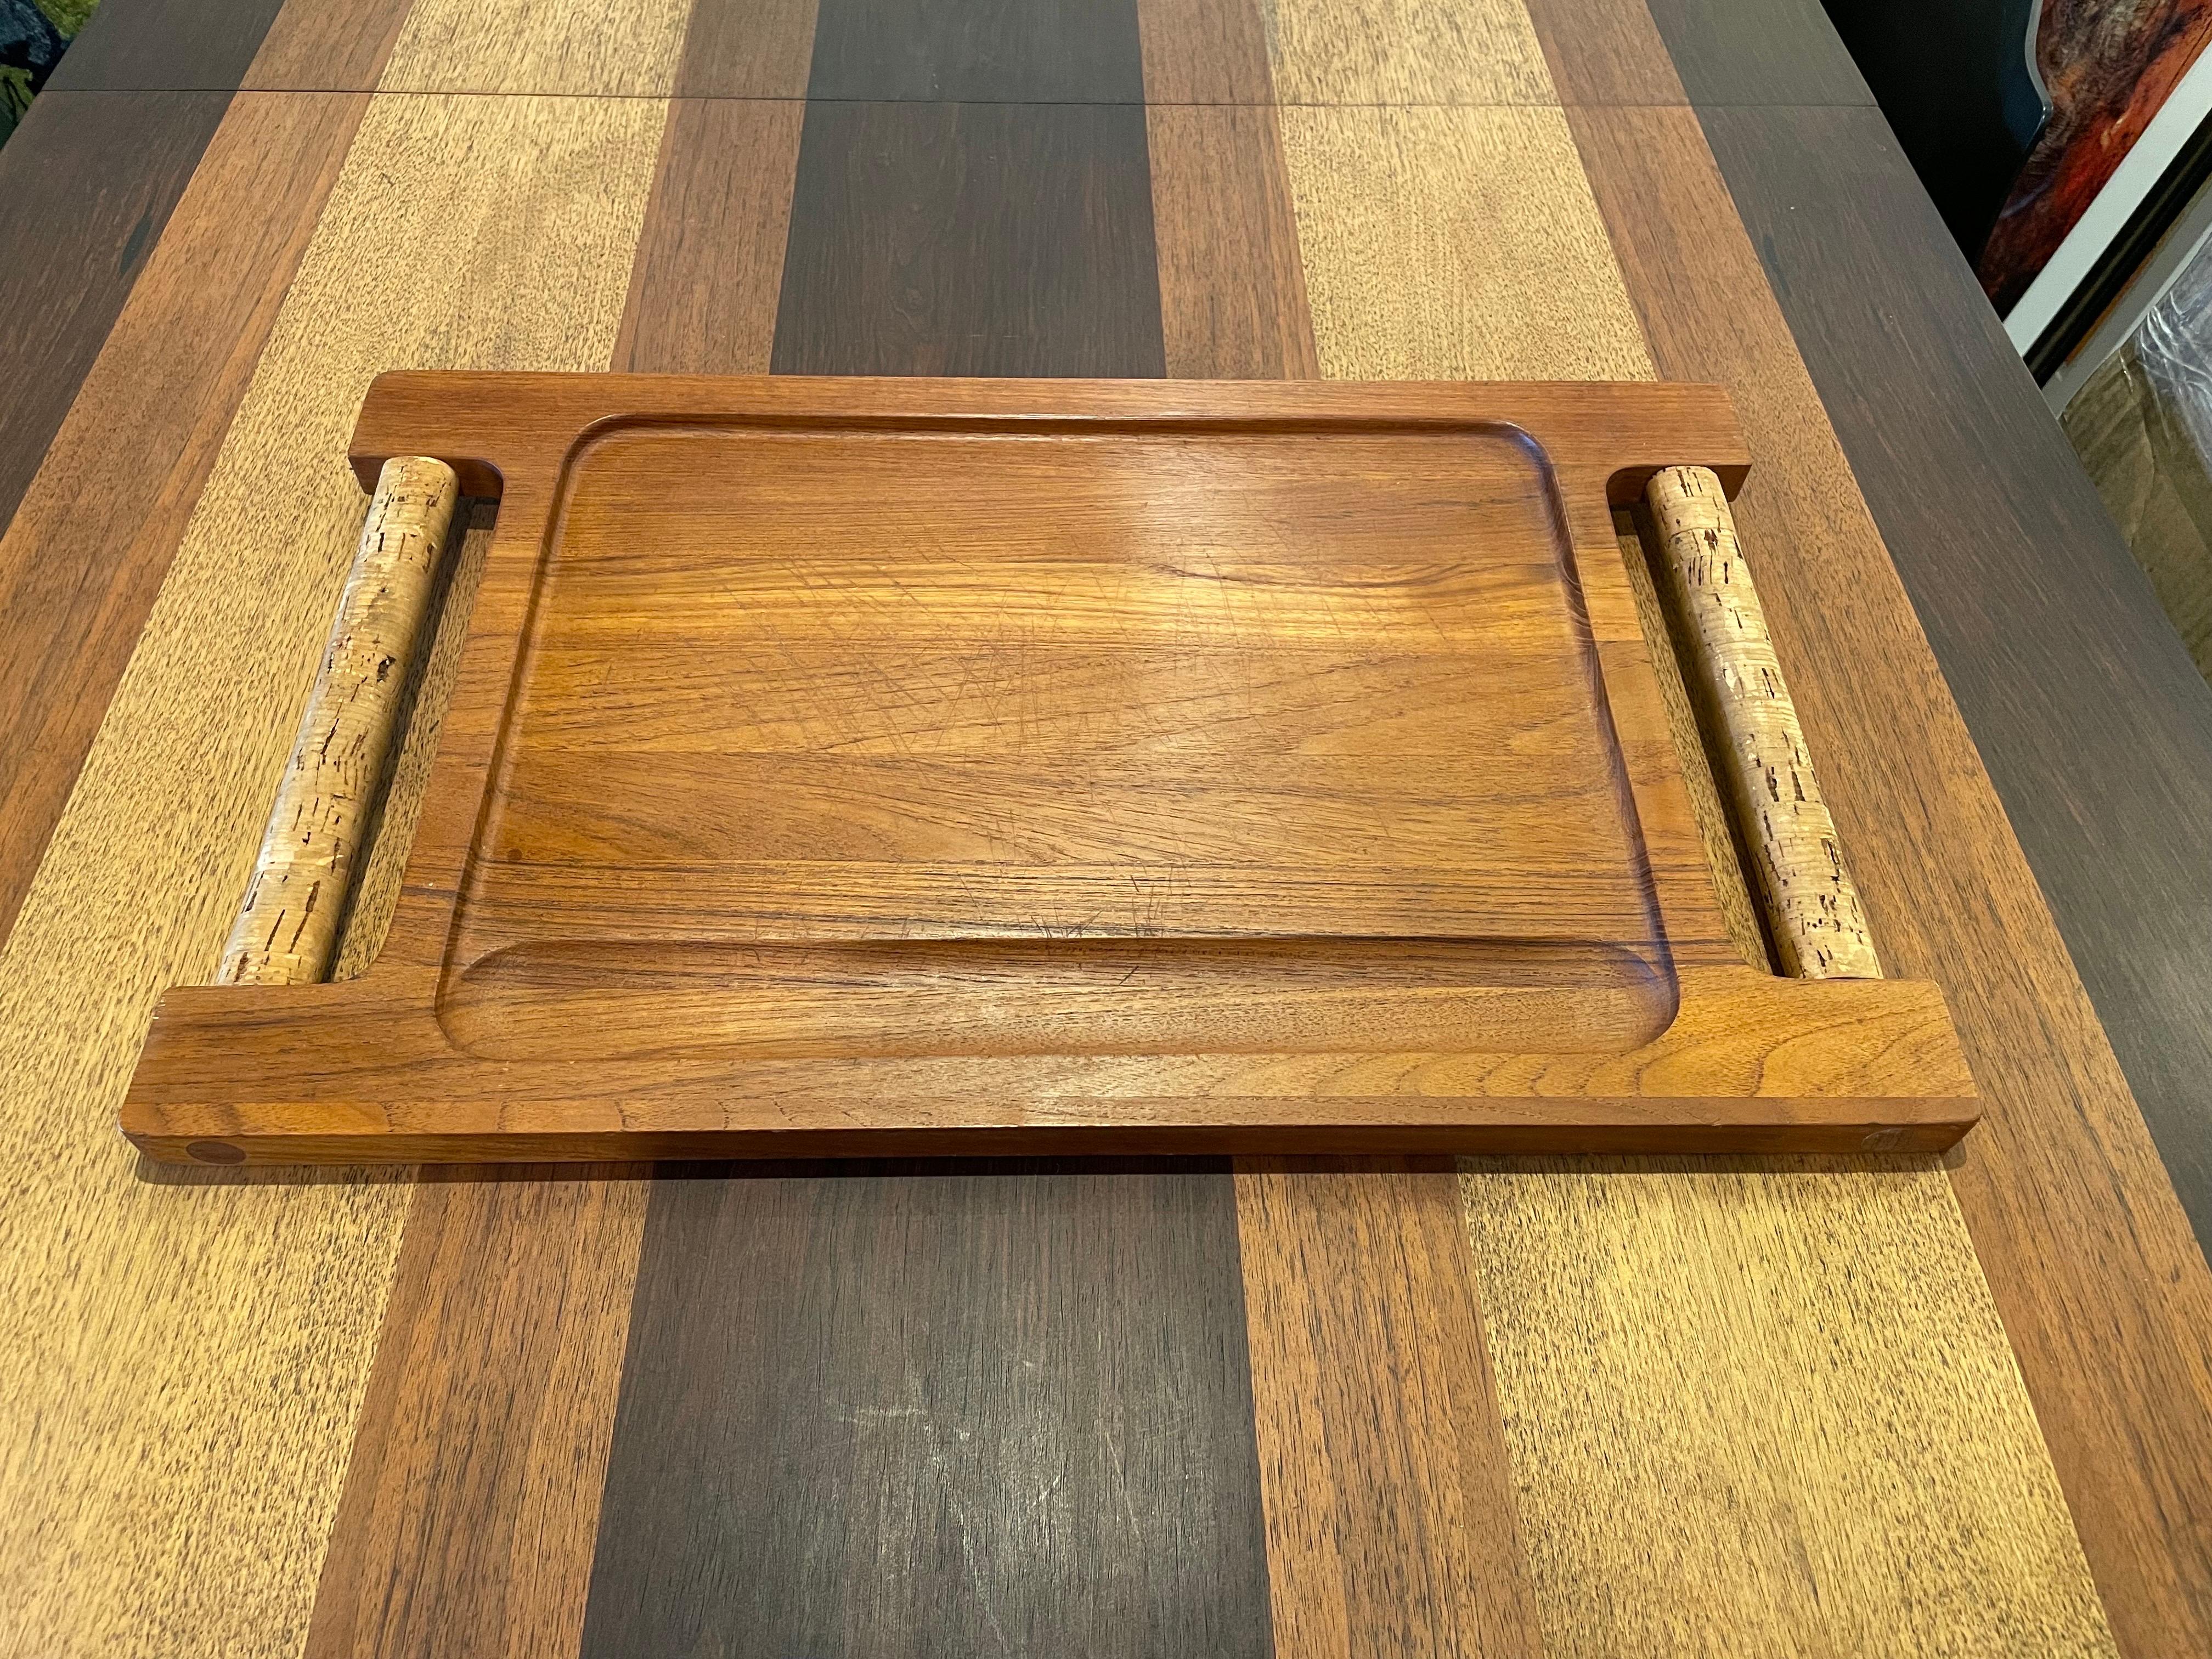 Rare Danish Modern Solid Teak Tray by Richard Nissen In Excellent Condition For Sale In San Diego, CA